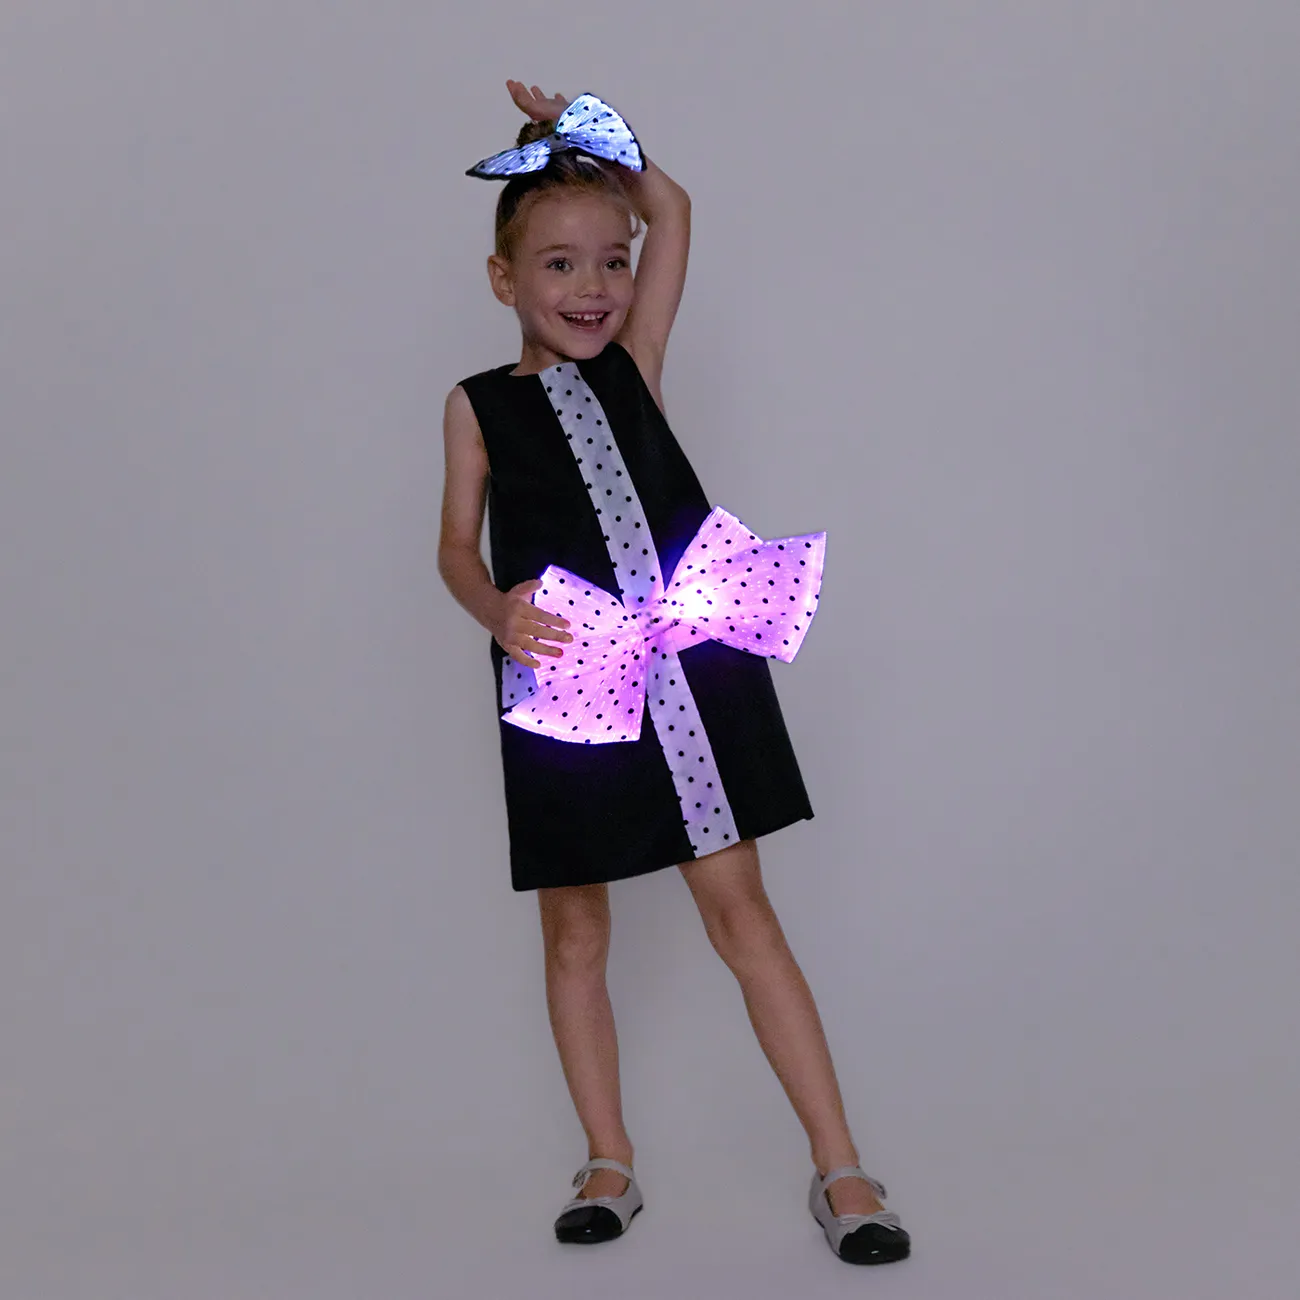 Go-Glow Illuminating Kid Black Dress with Light Up Removable Bowkont  Including Controller (Battery Inside) BlackandWhite big image 1